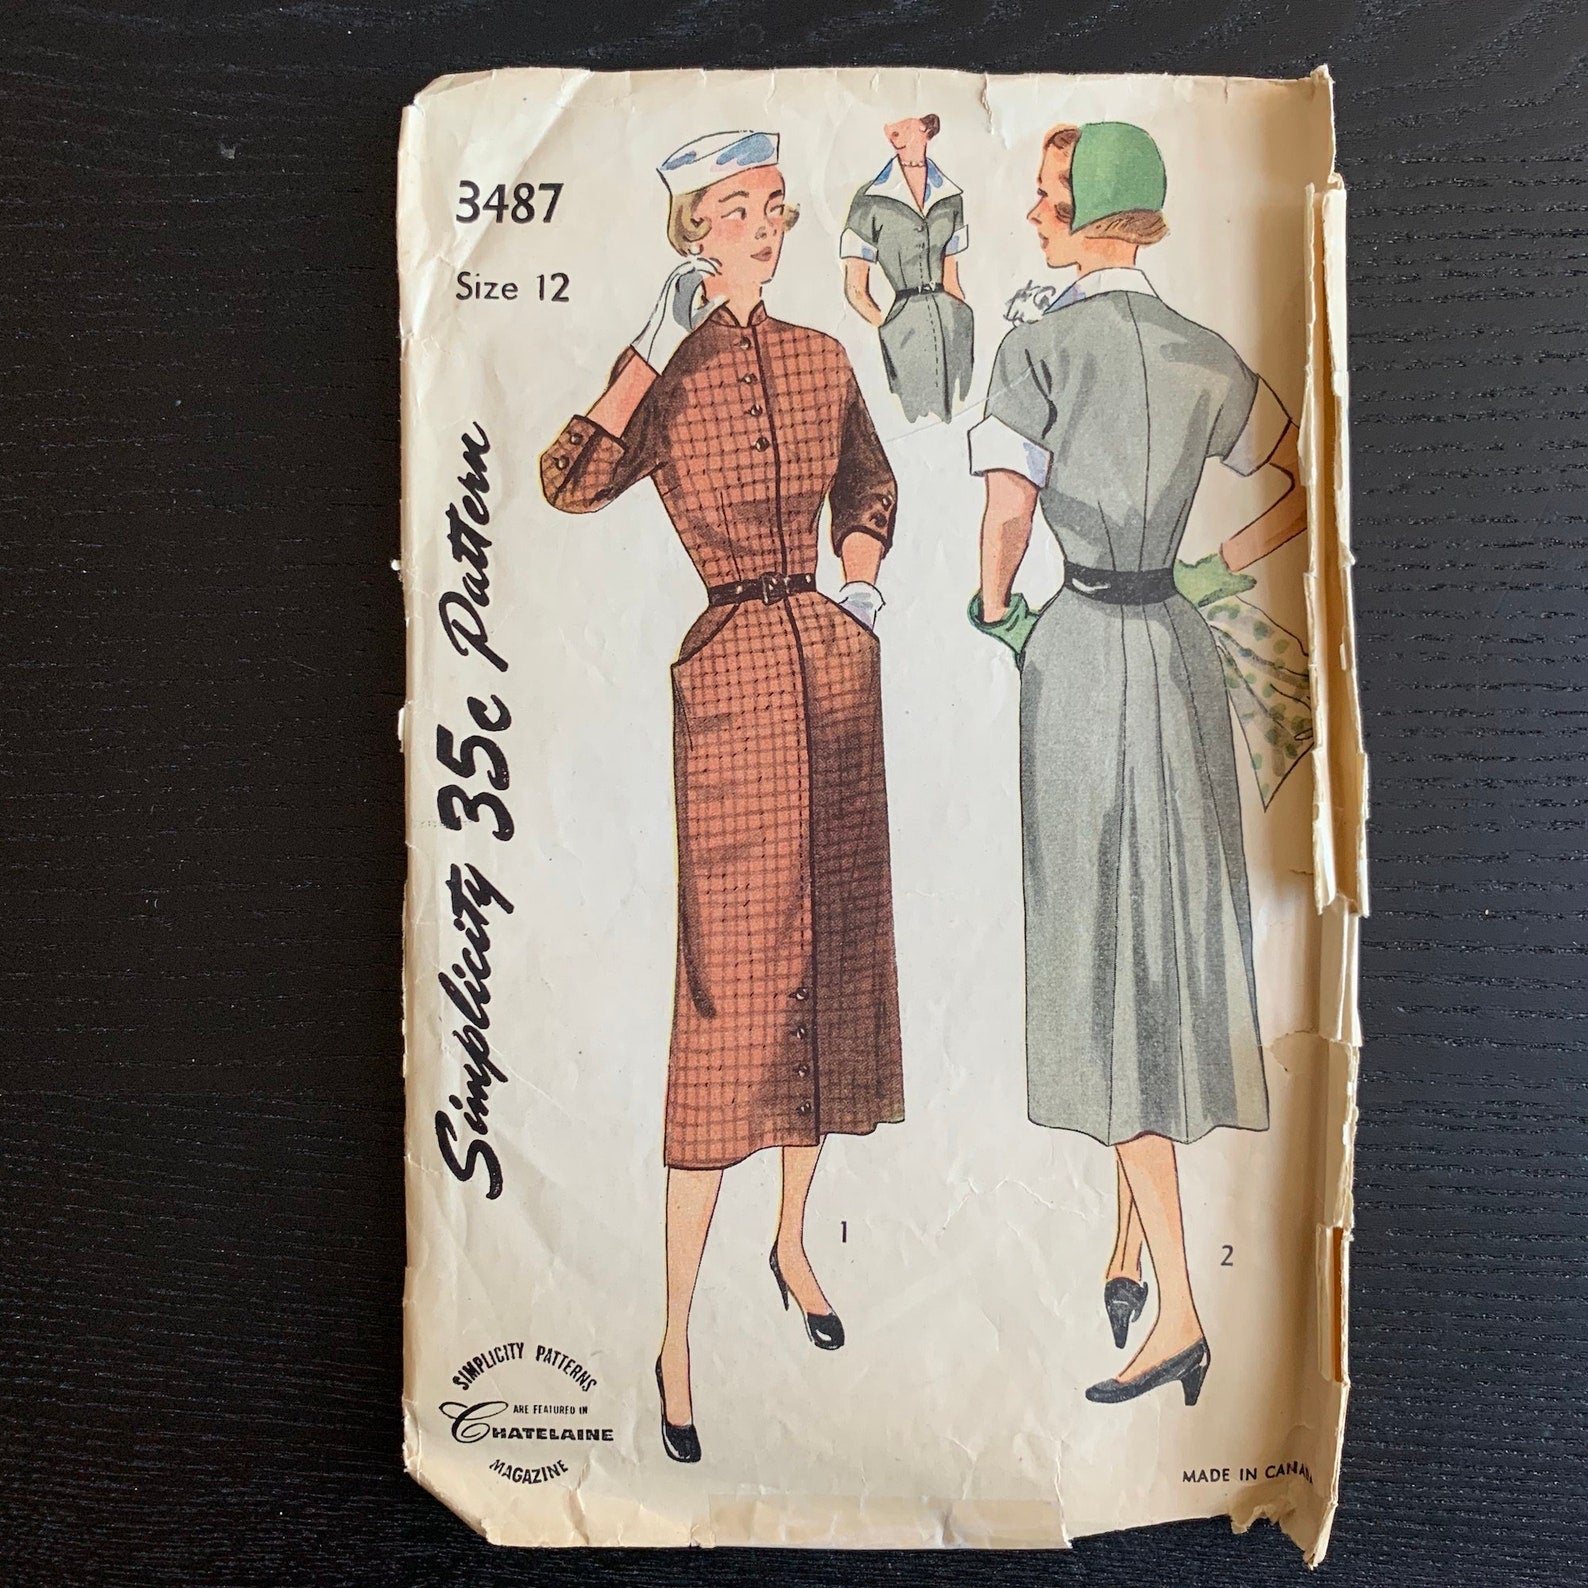 Vintage 1950s Women's Dress Sewing Pattern, Simplicity 3487, Bust 30" Waist 25", Incomplete